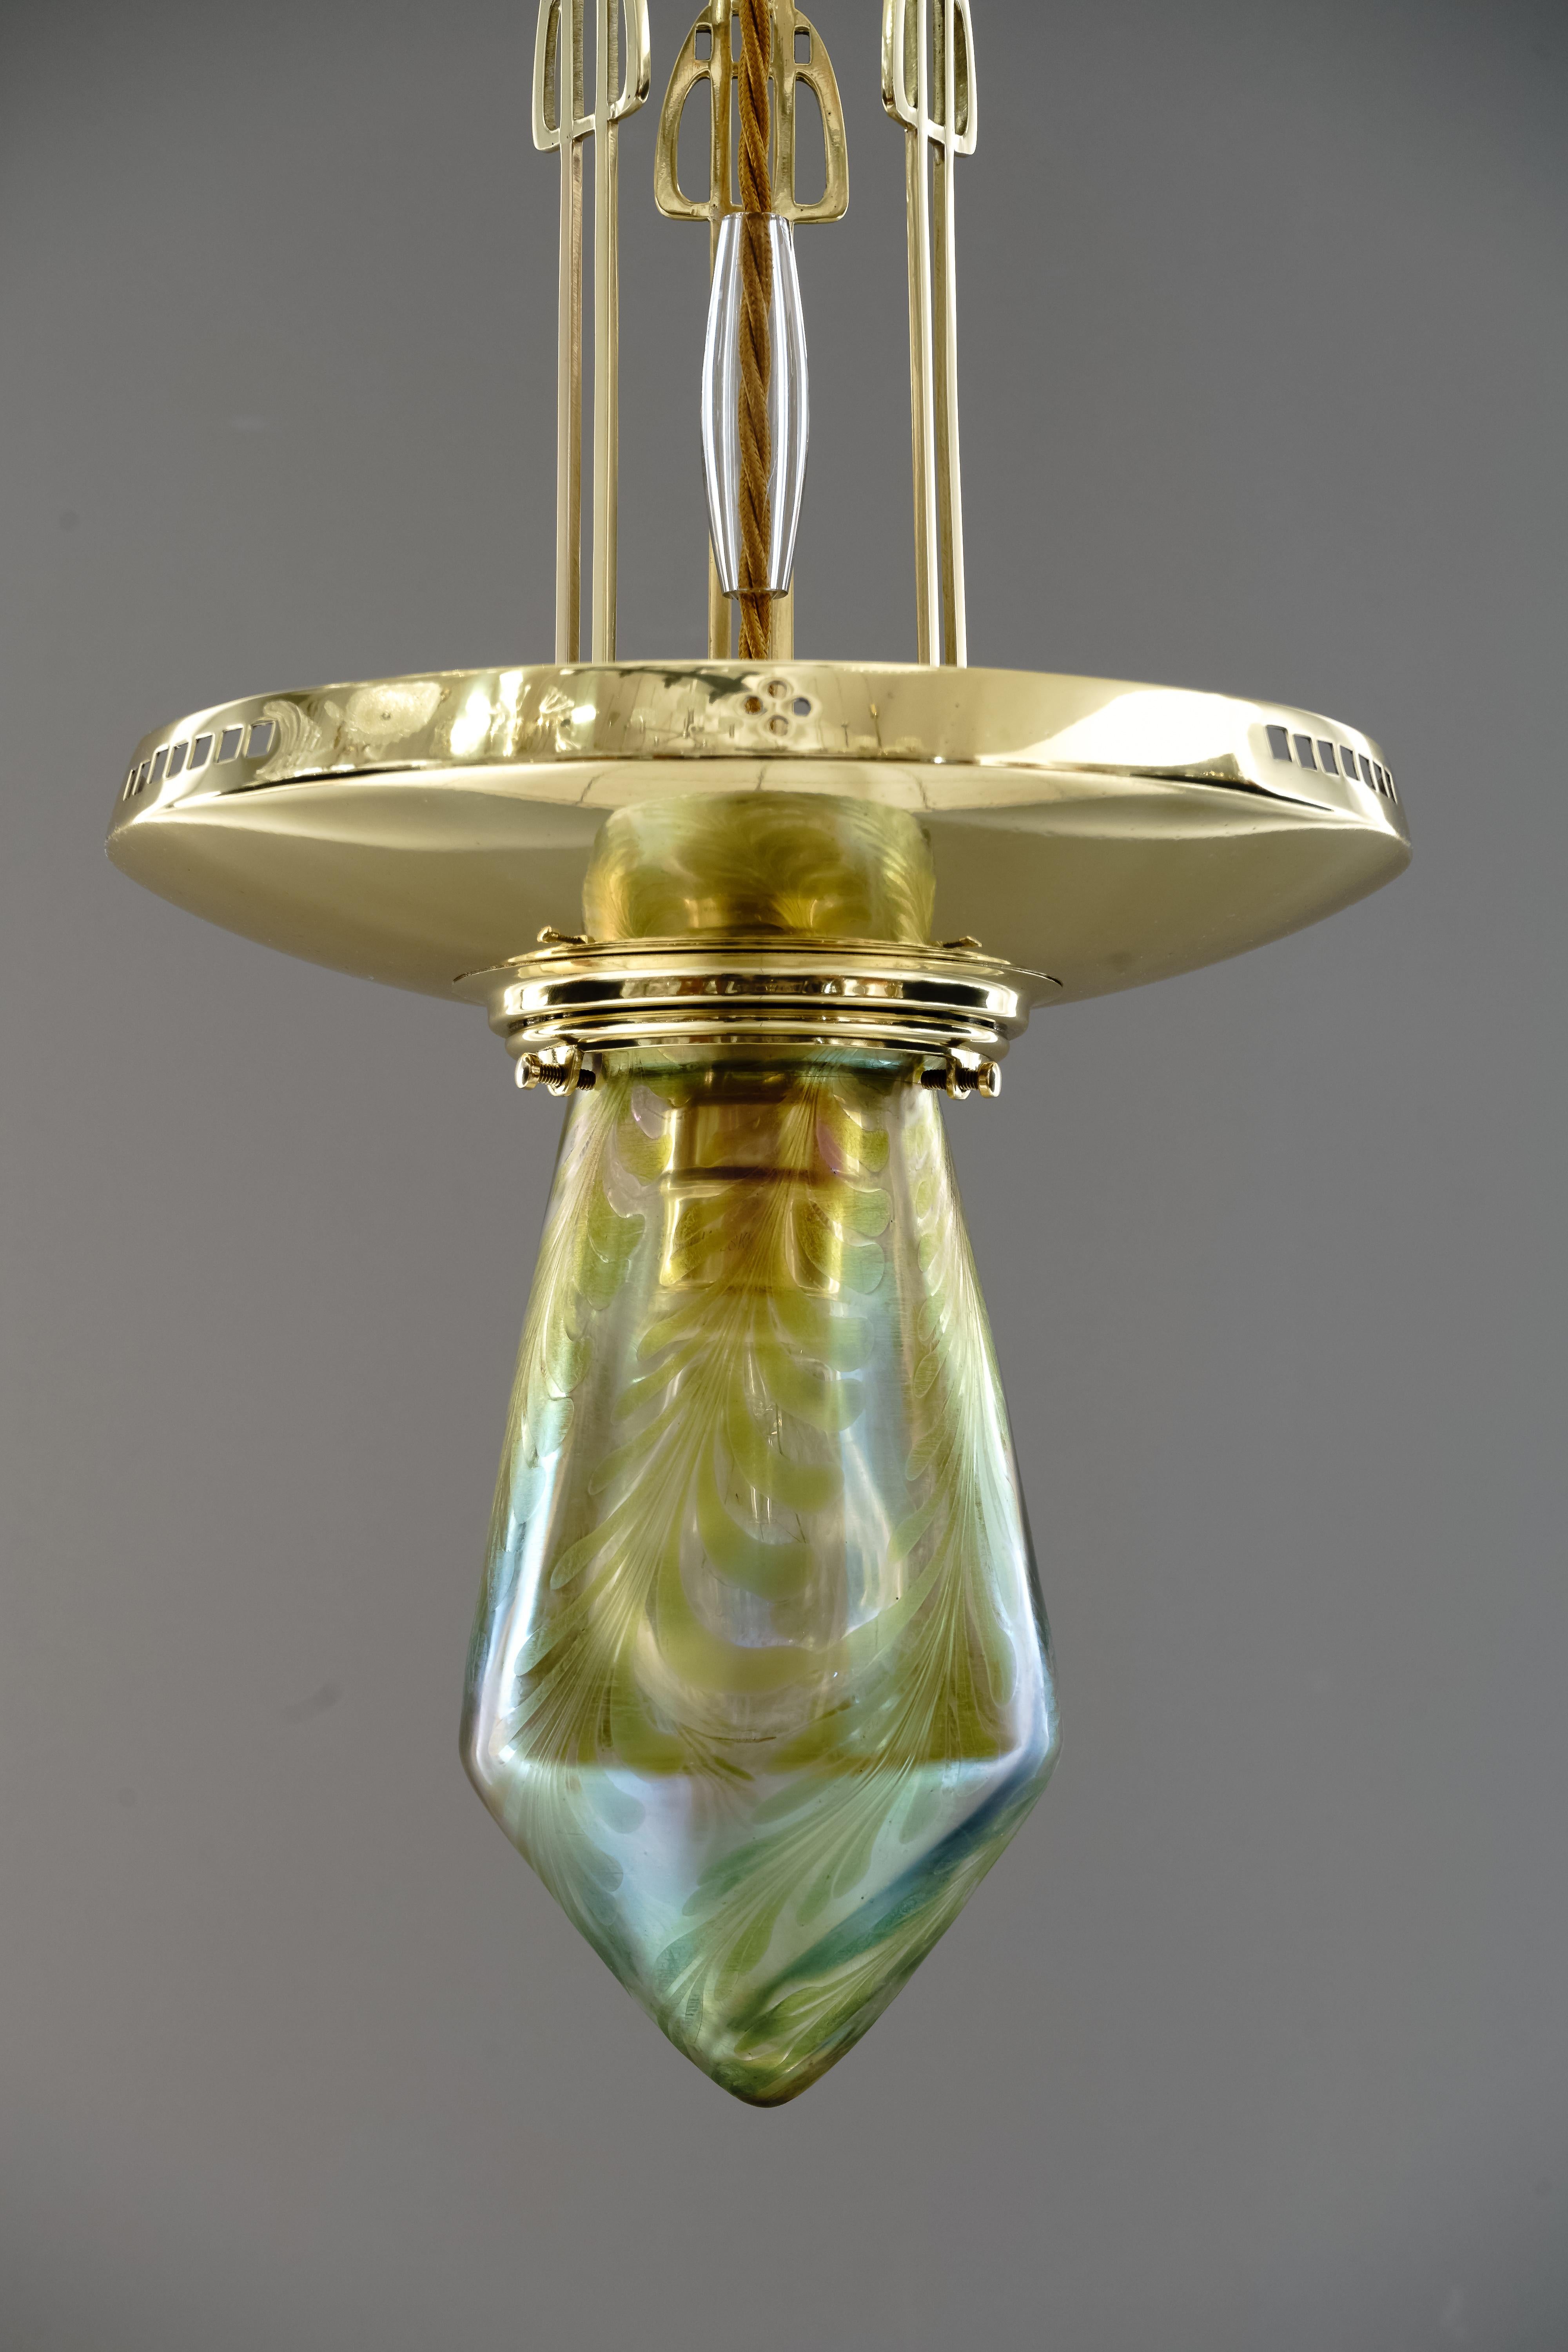 Early 20th Century Jugendstil Pendant with Loetz Glass, Vienna, circa 1910s